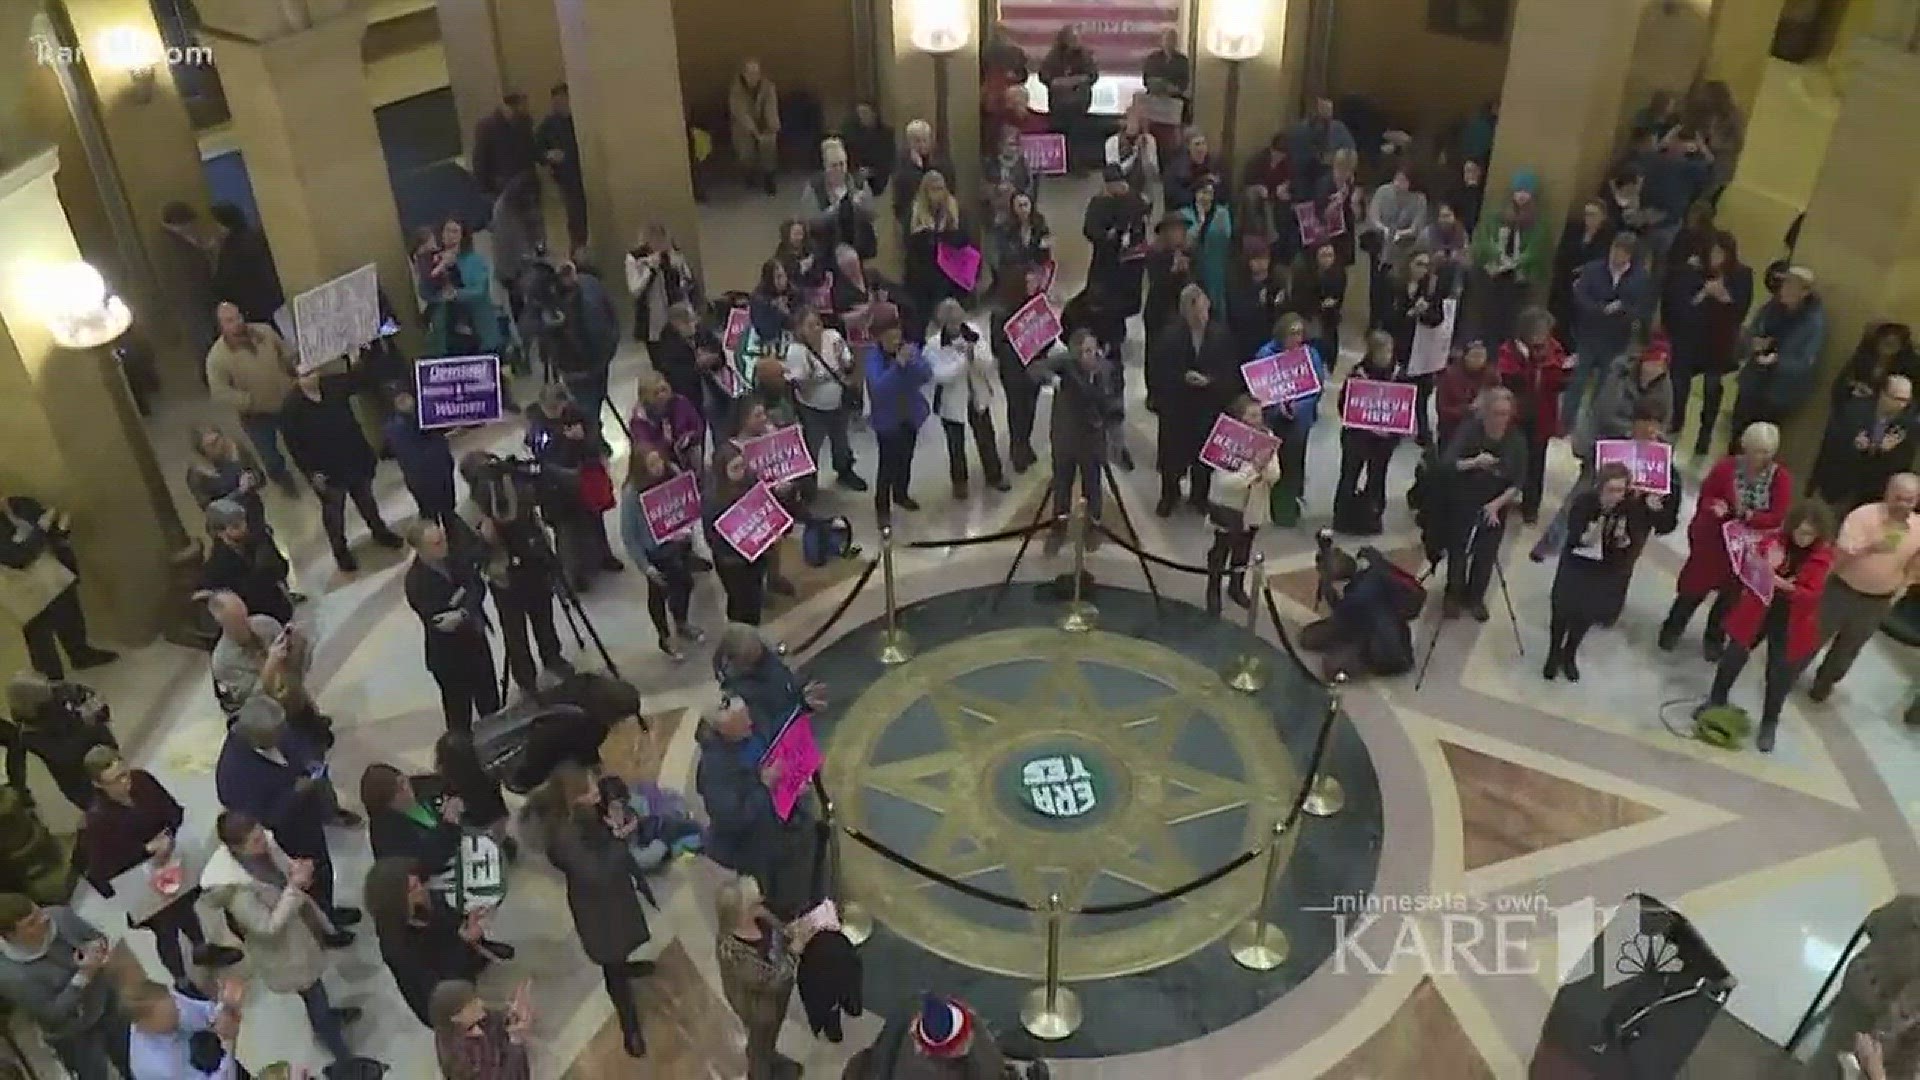 'I Believe Her' rally at the State Capitol